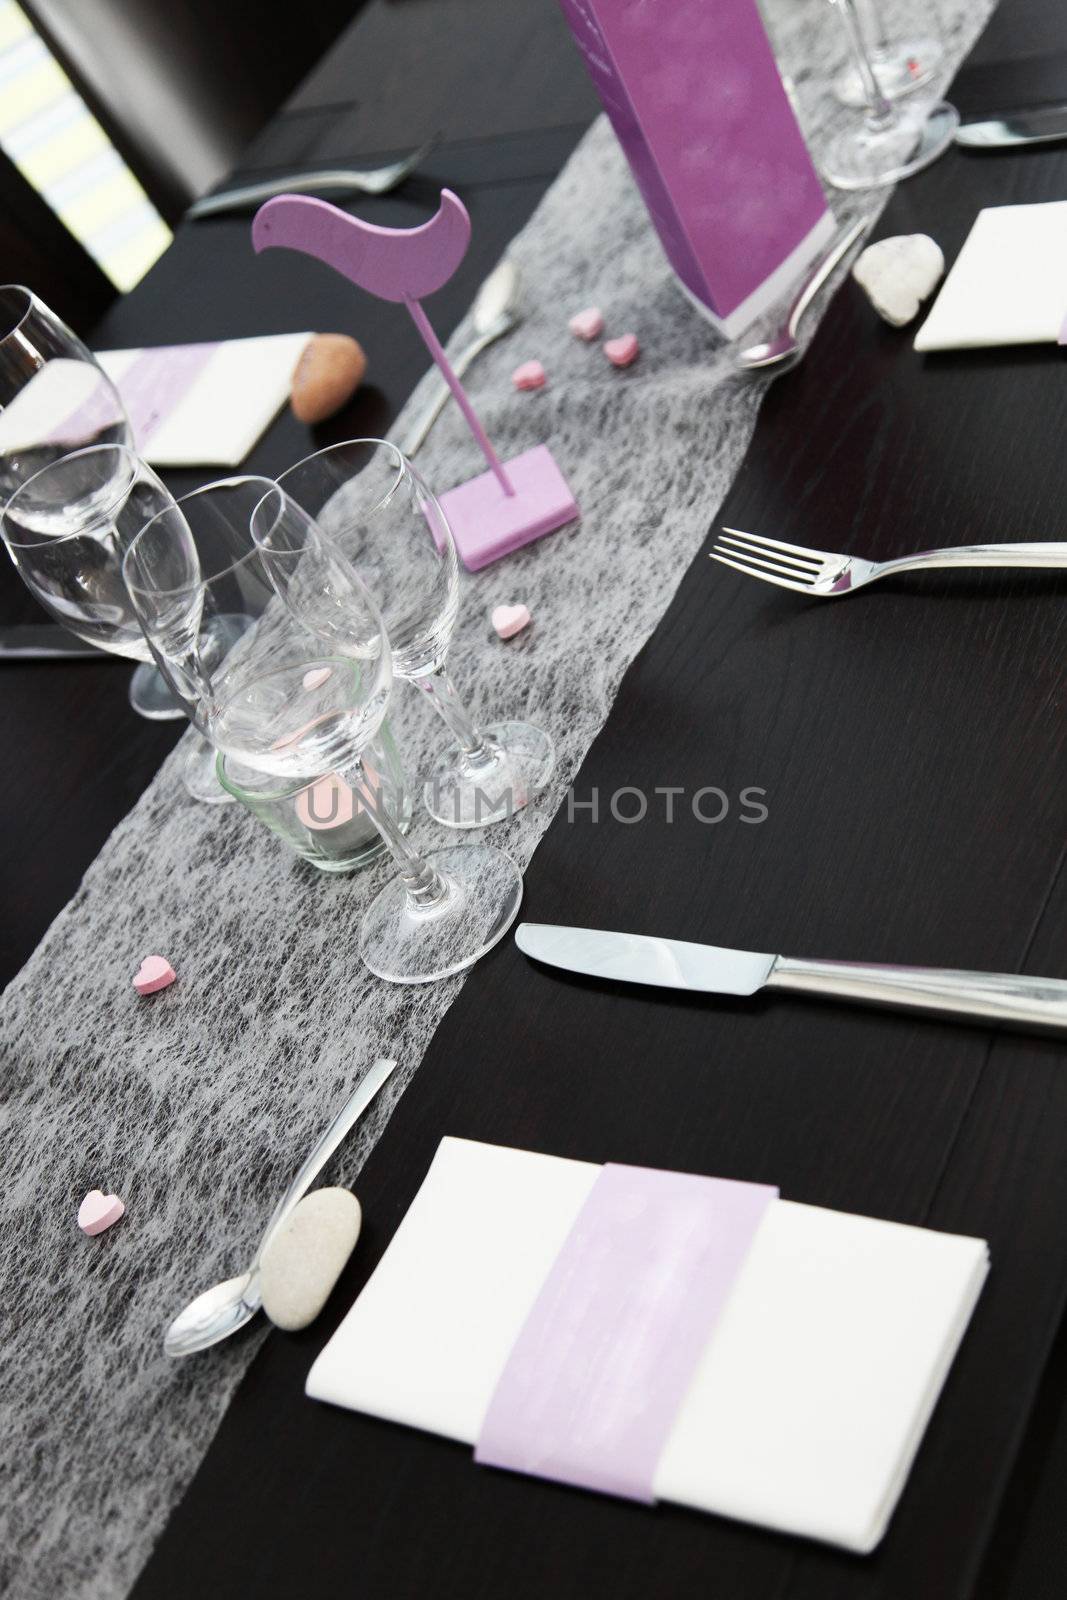 Elegant formal table setting with silverware, linen and glasses on a black tablecoth at a restaurant or catered event Elegant formal table setting with sliberware, linen and glasses on a black tablecoth at a restaurant or catered event 